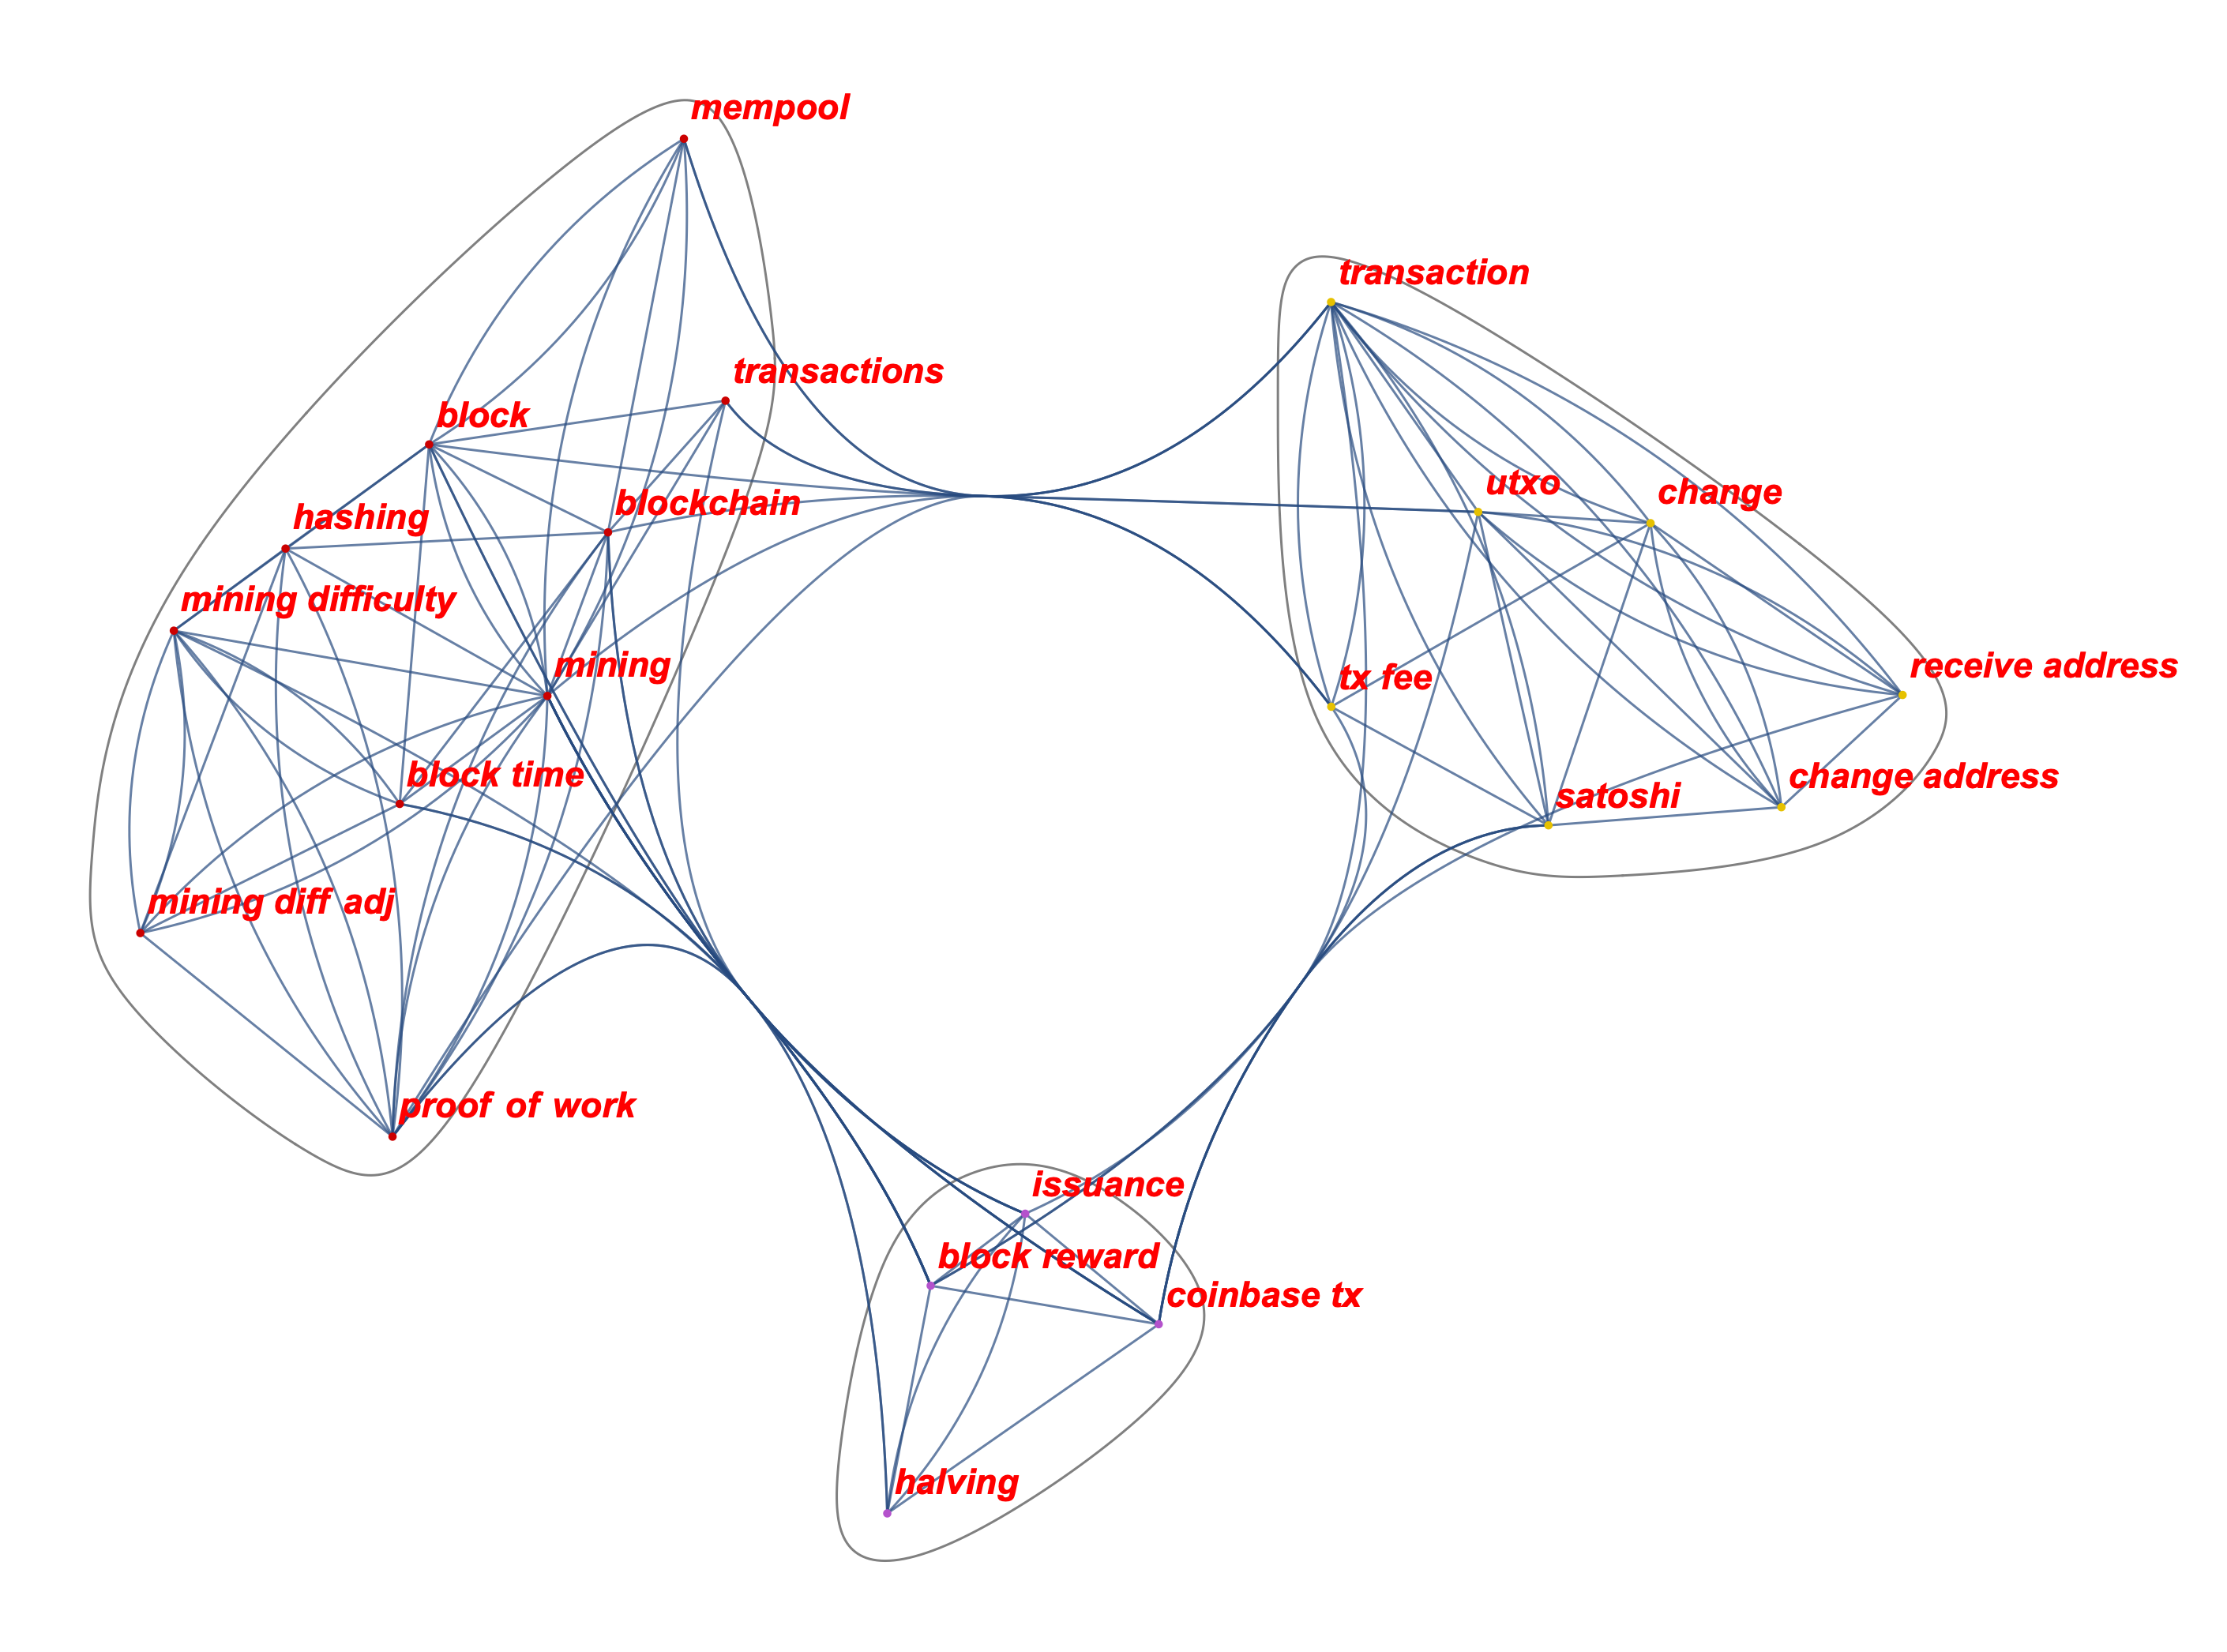 Cliques in the network graph